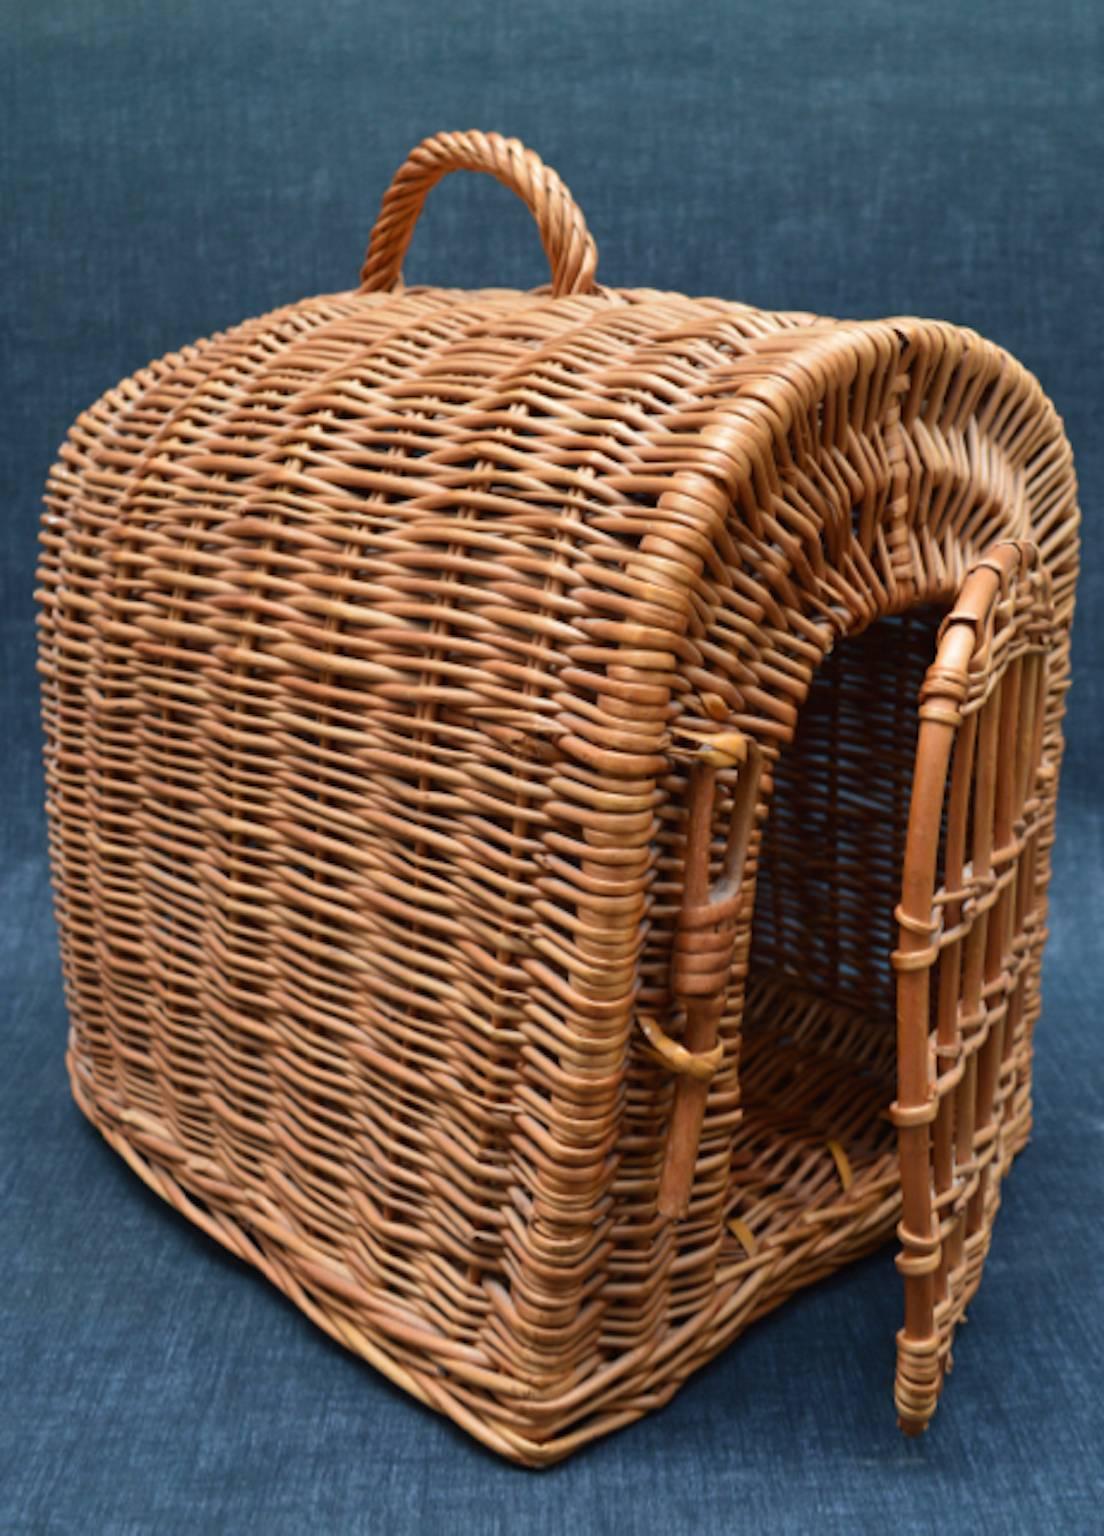 Country chic vintage wicker basket pet carrier is in excellent condition and can be used as a cozy bed or travel carrier for a cat or small dog.
Also just a chic prop in a country home.